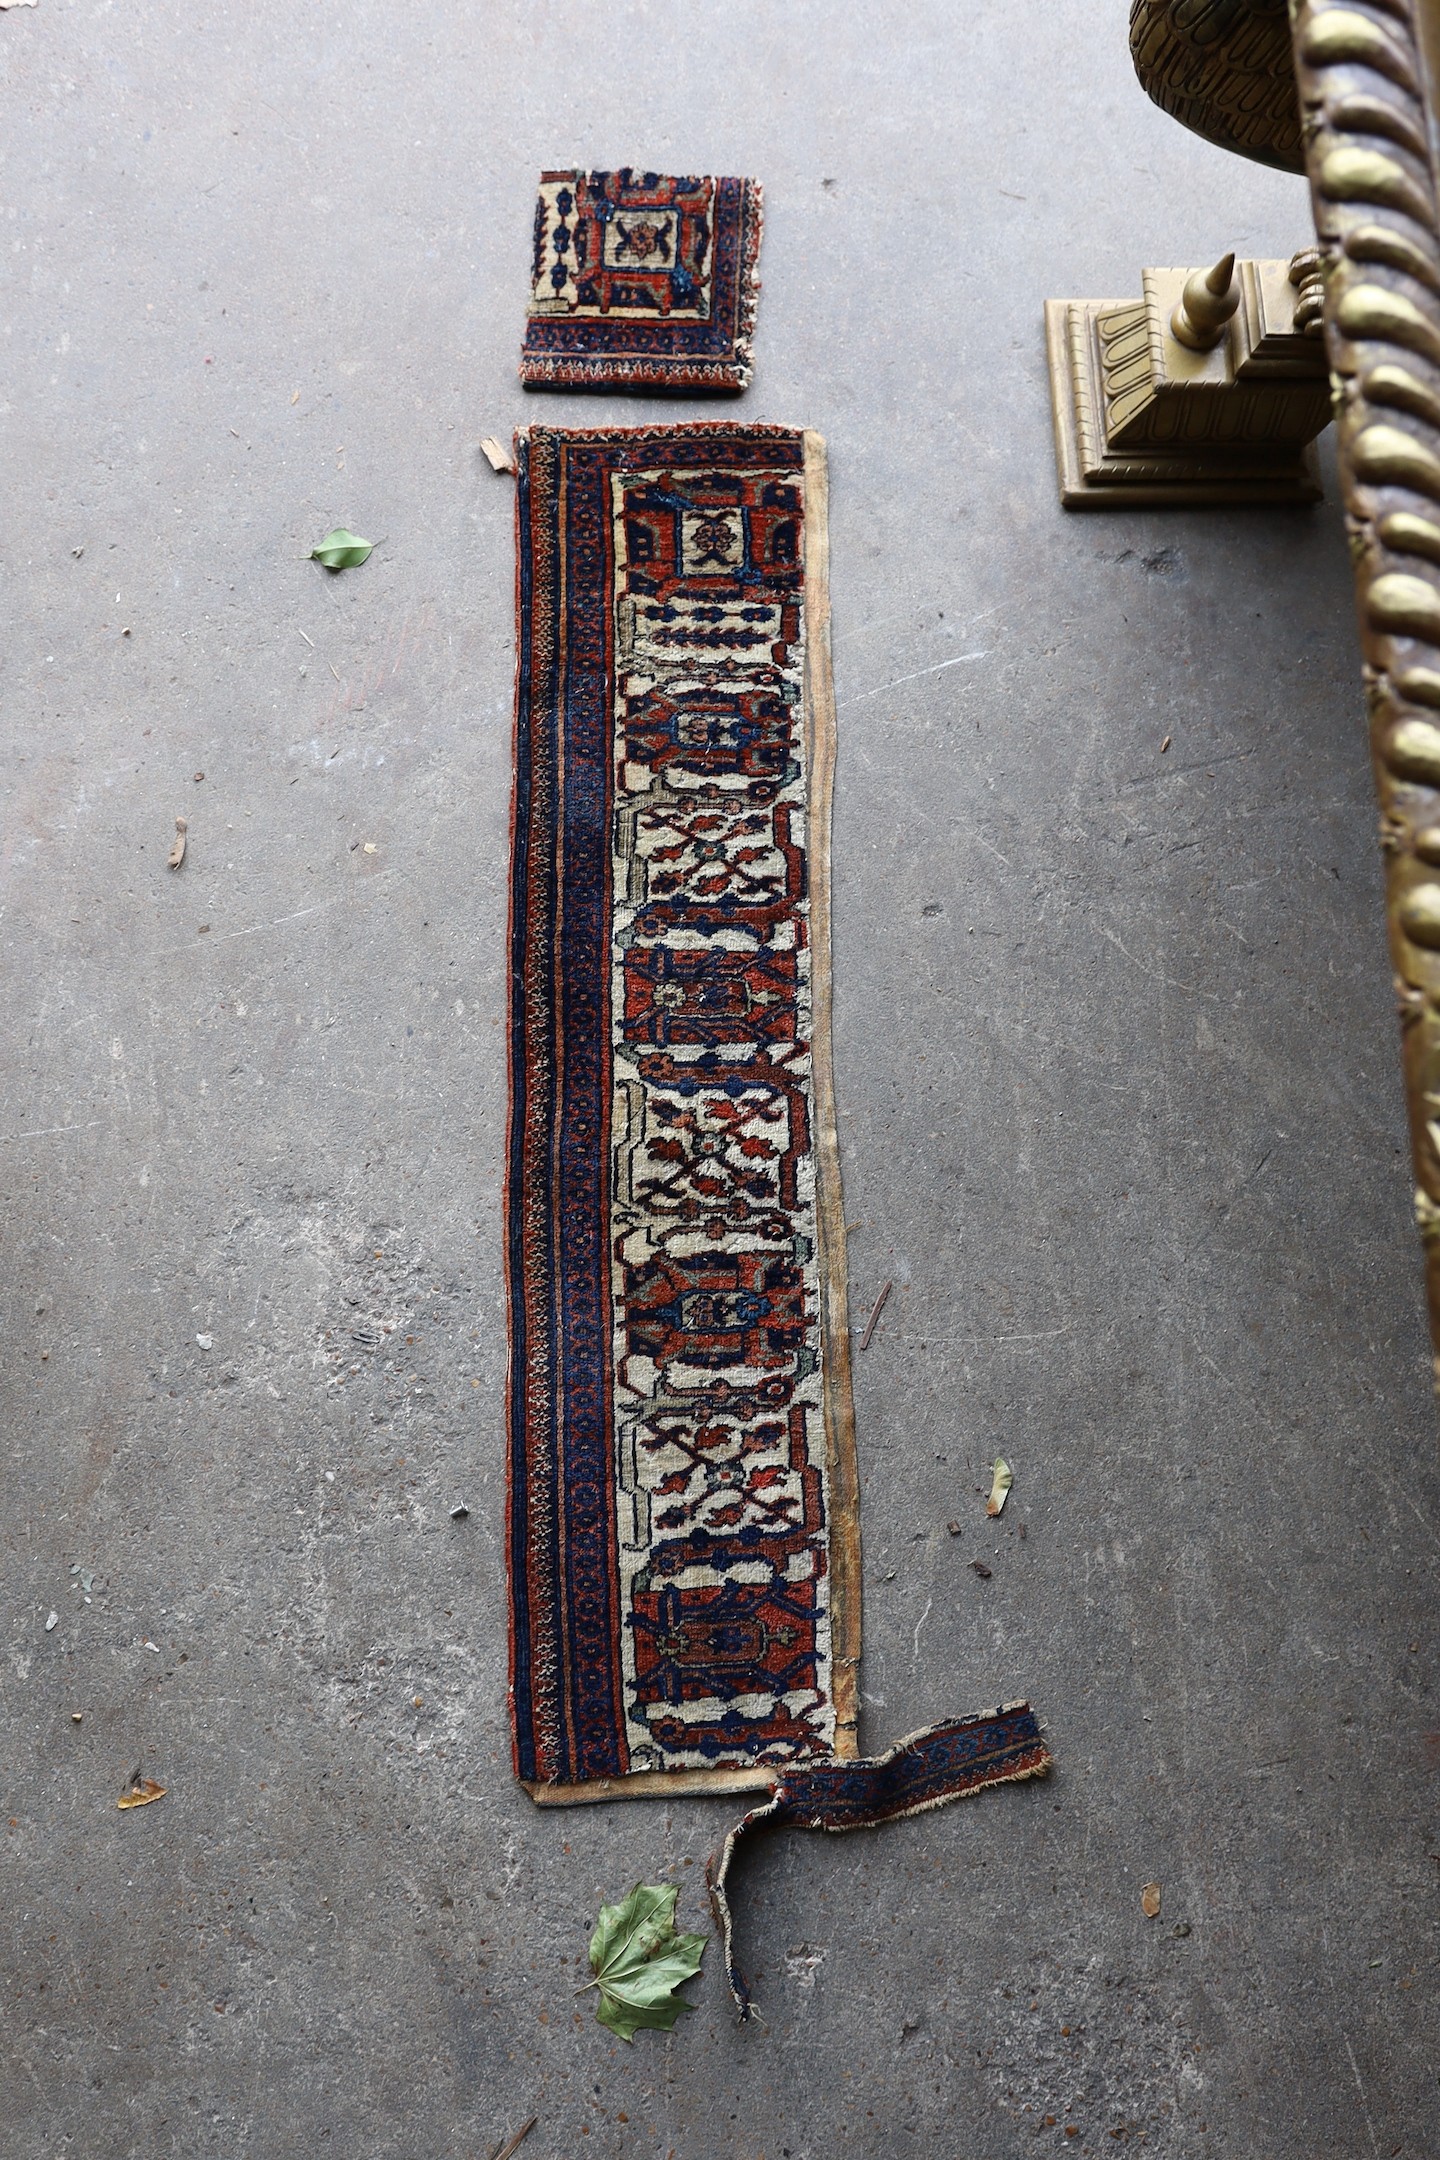 An antique Caucasian Derbend rug, 160 x 108cm, a smaller red ground rug and rug fragments